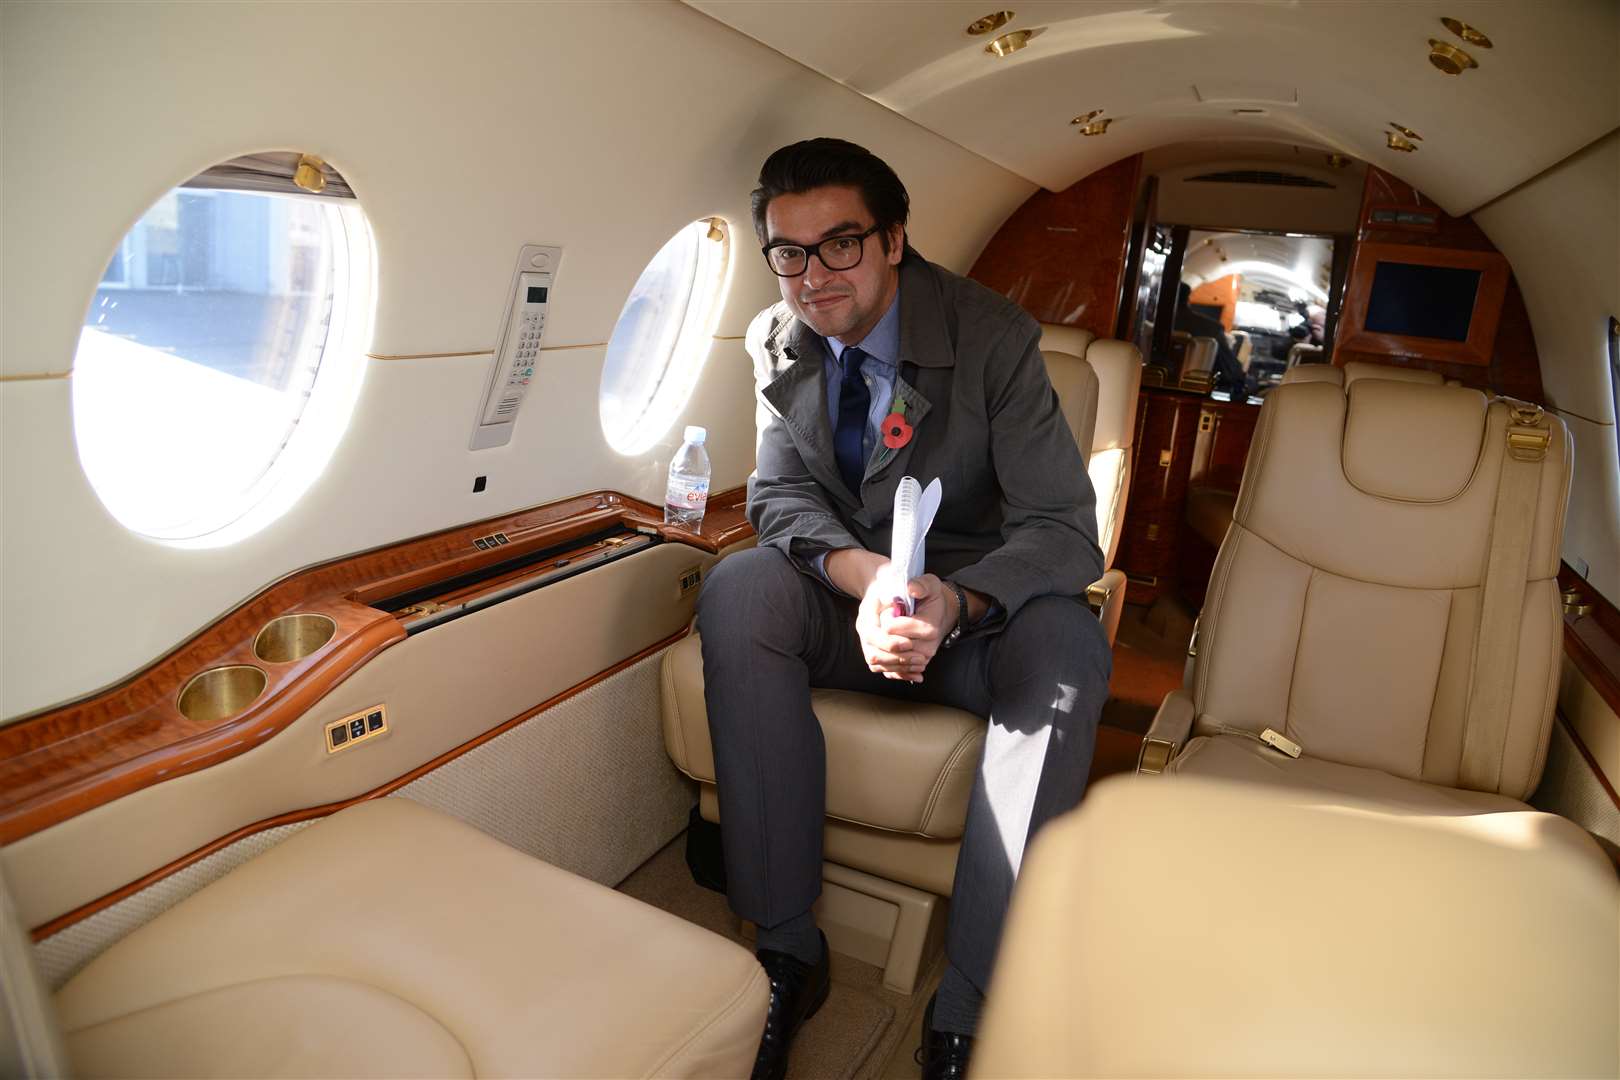 Business editor Chris Price inside ABA's jet, which runs chartered flights under its World Executive Airways brand and will soon offer corporate hospitality packages